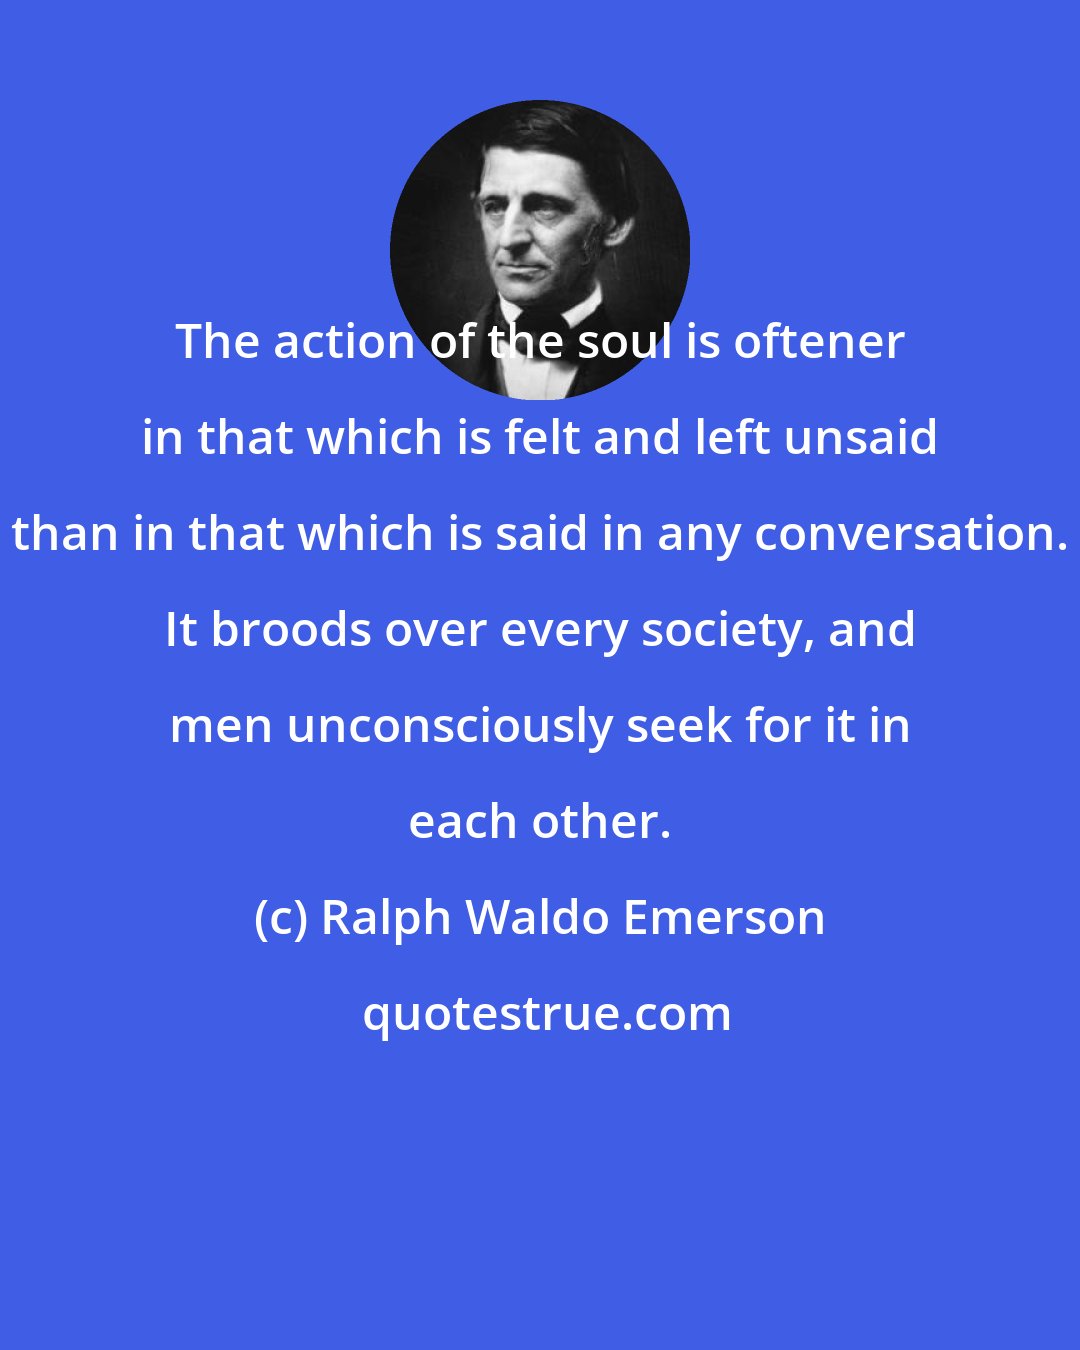 Ralph Waldo Emerson: The action of the soul is oftener in that which is felt and left unsaid than in that which is said in any conversation. It broods over every society, and men unconsciously seek for it in each other.